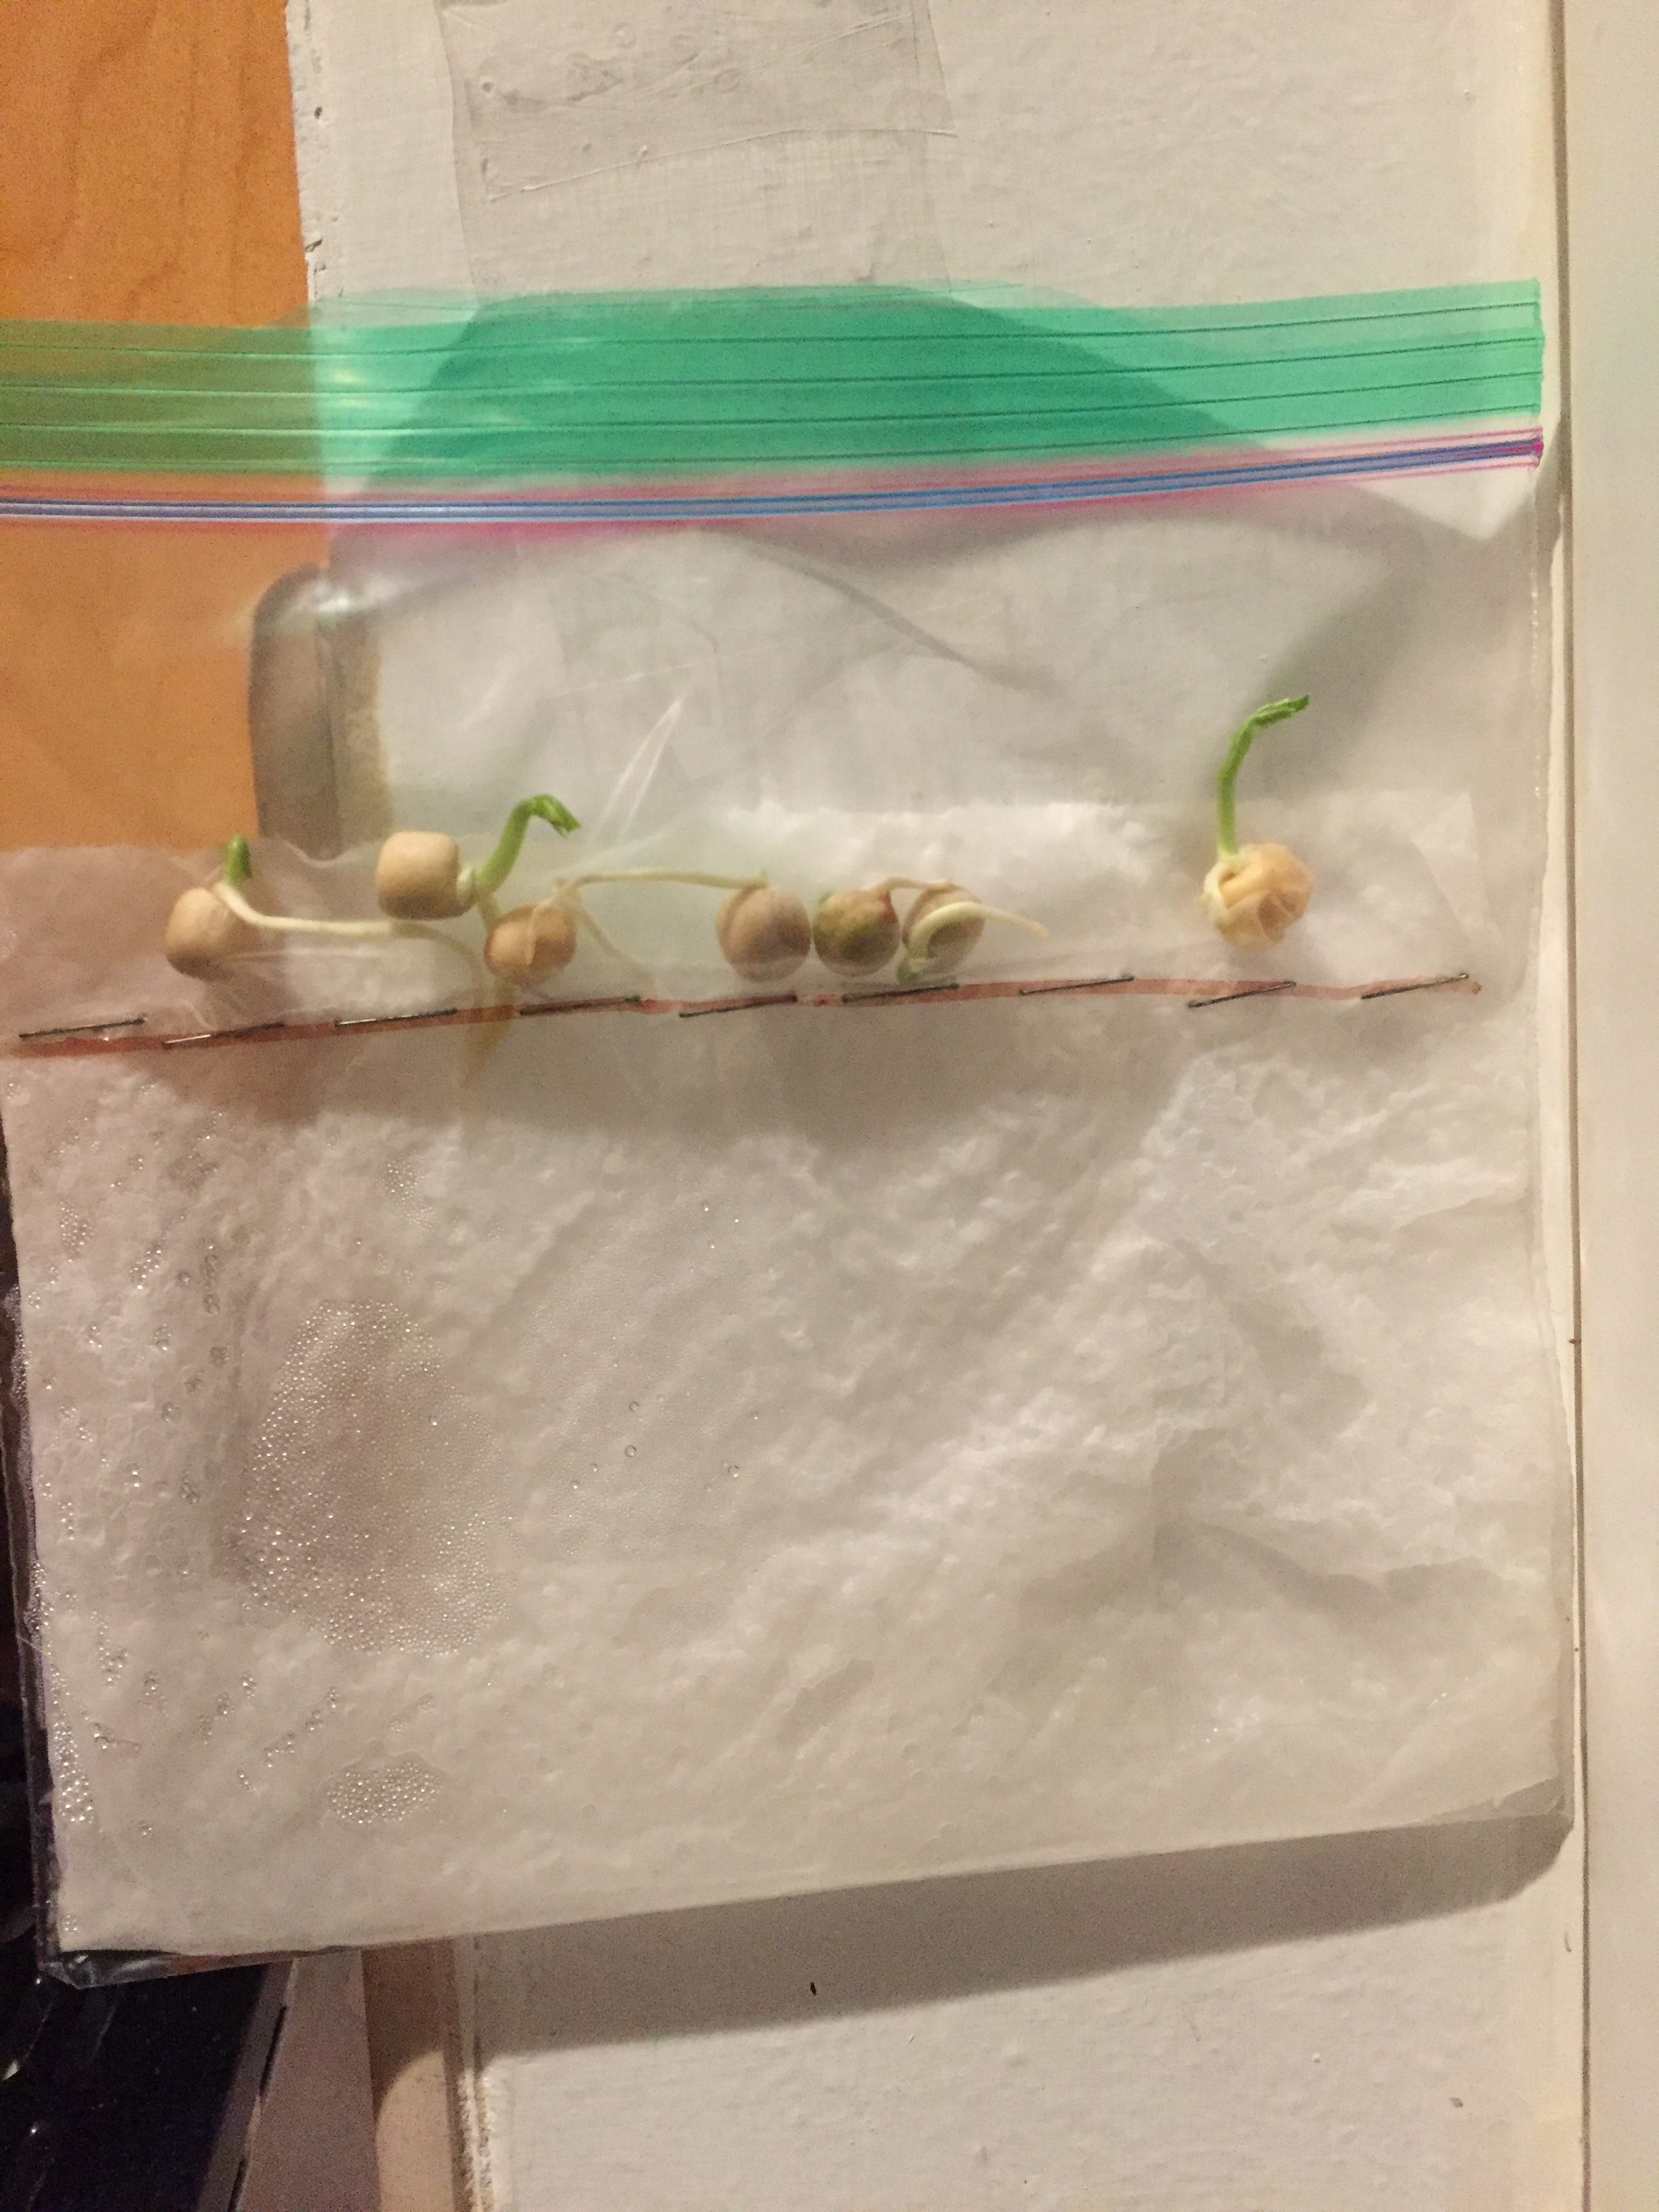 Pea seeds sprouting in a plastic bag with a damp paper towel.